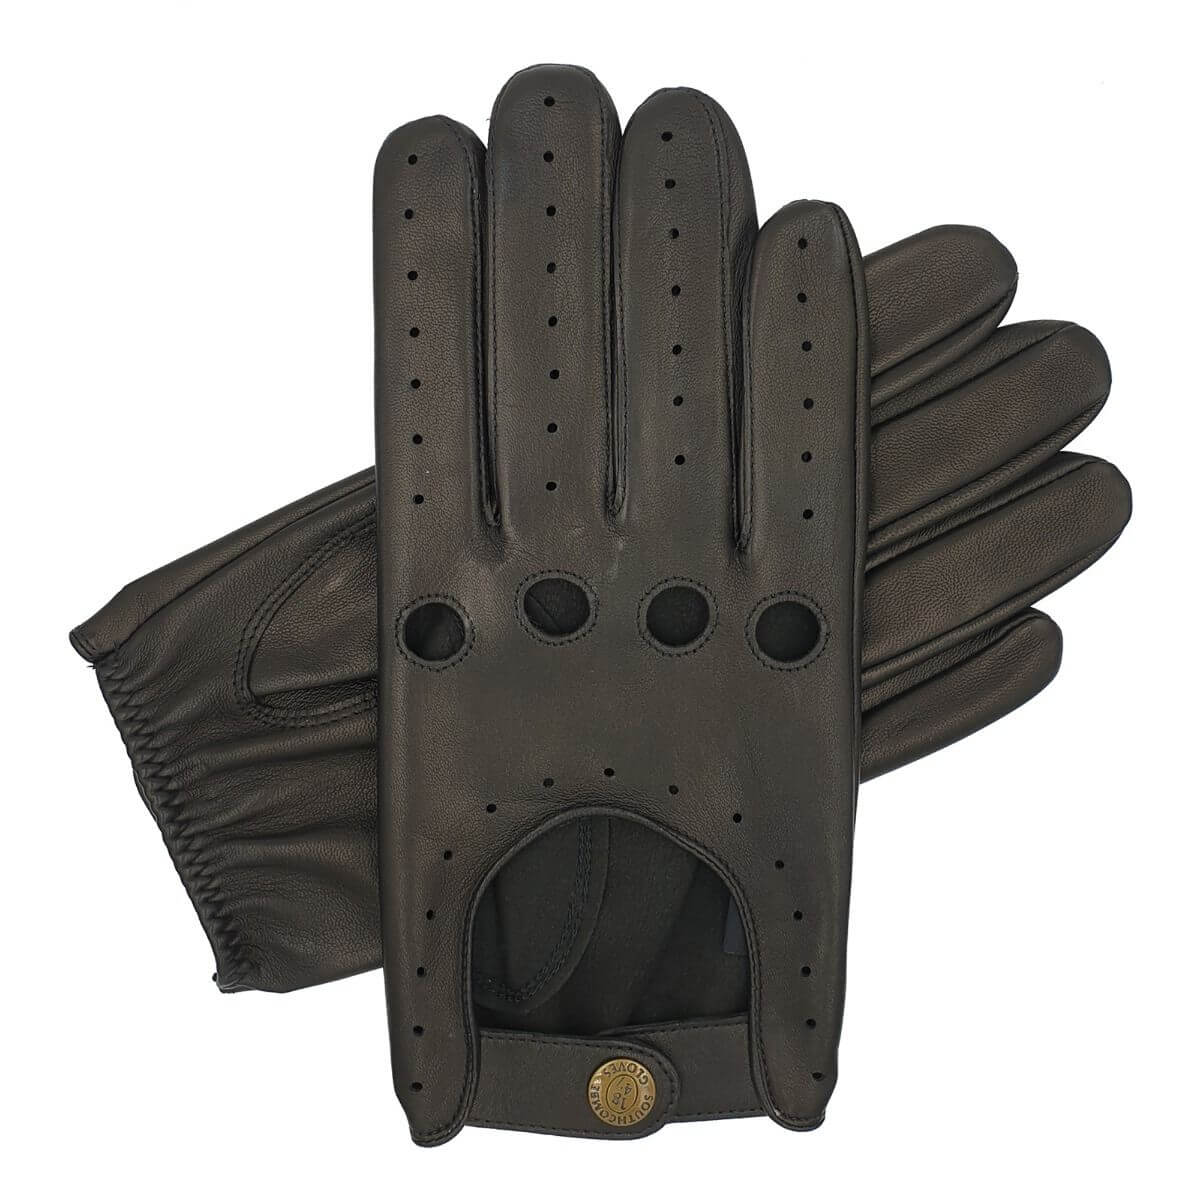 Southcombe Cooper - Men's Unlined Leather Driving Glove - Black